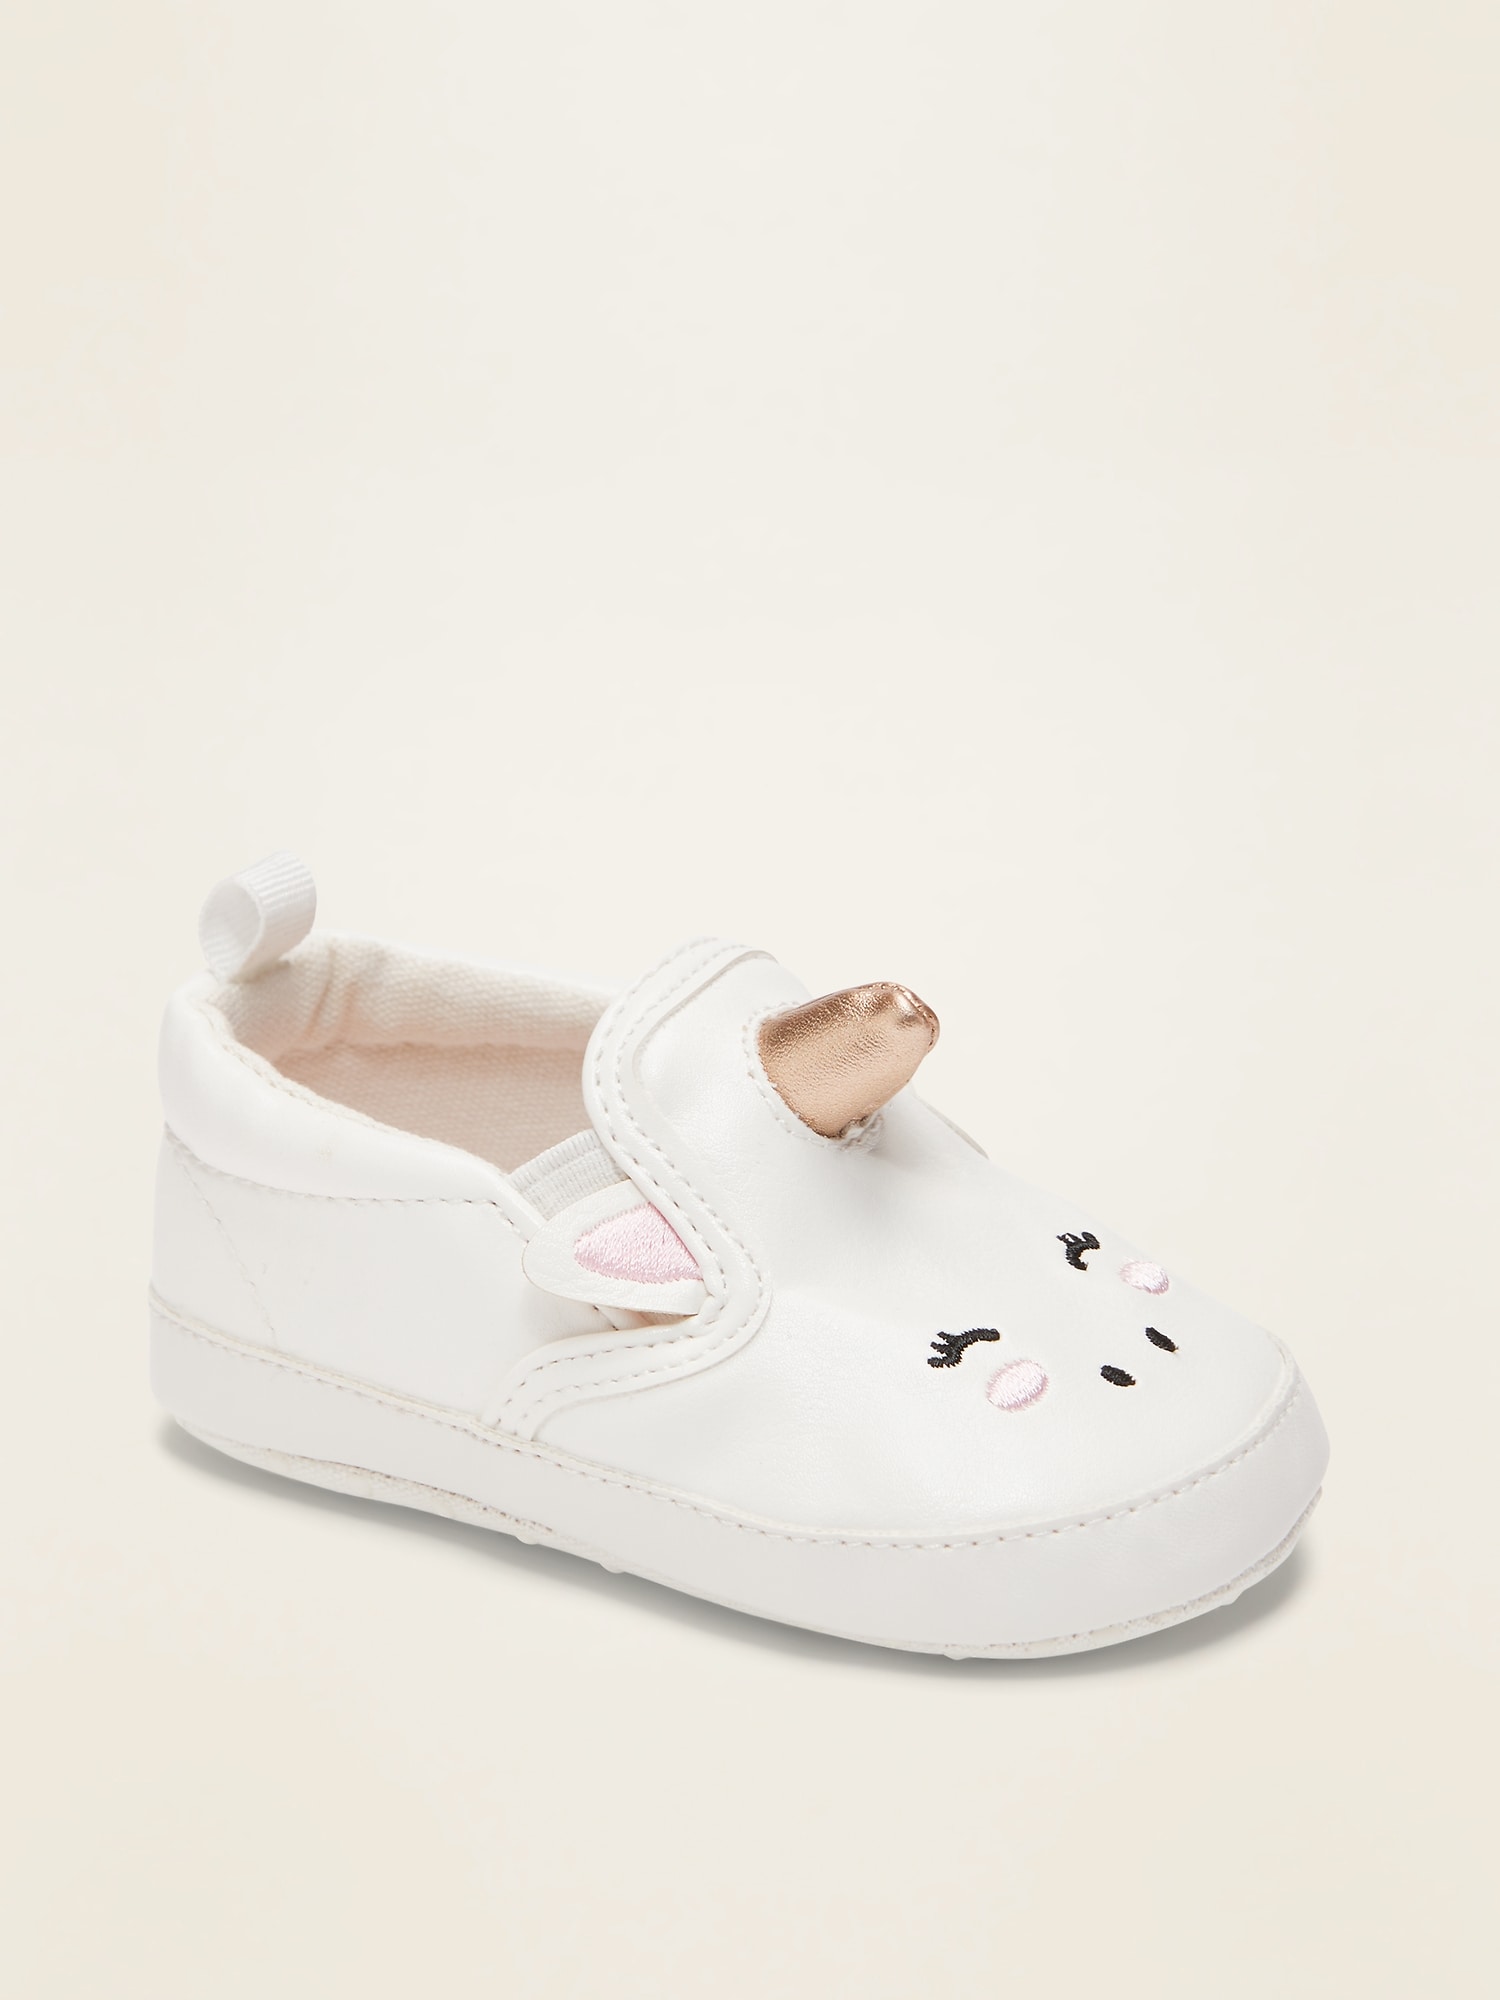 Unicorn Slip-Ons for Baby | Old Navy